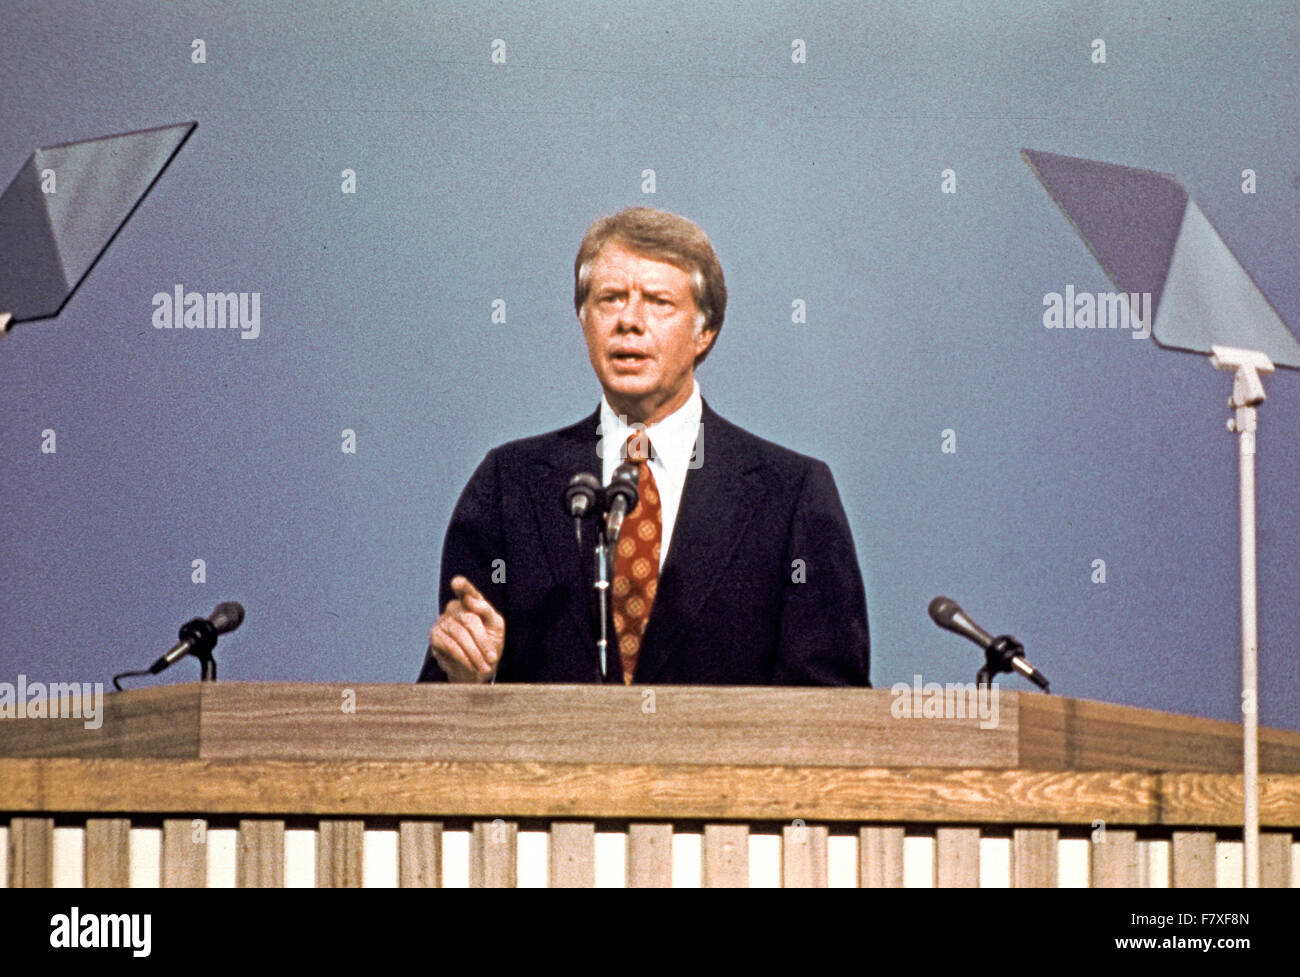 Governor Jimmy Carter (Democrat of Georgia), the 1976 Democratic Party nominee for President of the United States, delivers his acceptance speech at the 1976 Democratic Convention at Madison Square Garden, New York, New York on July 15, 1976. Credit: Arnie Sachs/CNP - NO WIRE SERVICE - Stock Photo